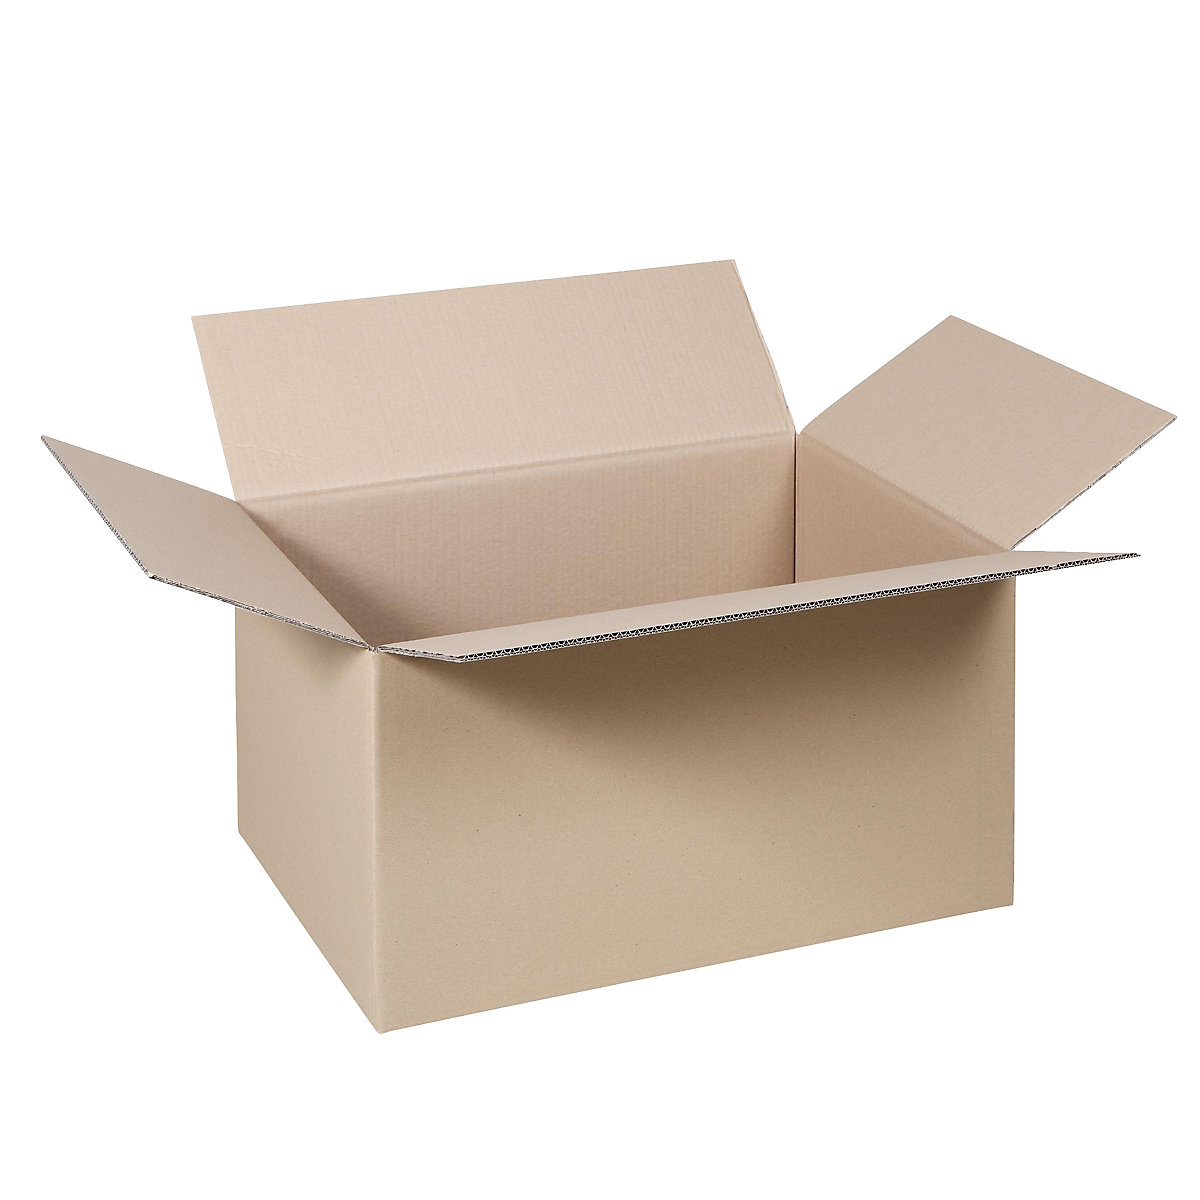 Folding cardboard box, FEFCO 0201, made of double fluted cardboard, internal dimensions 484 x 384 x 368 mm, pack of 100-36